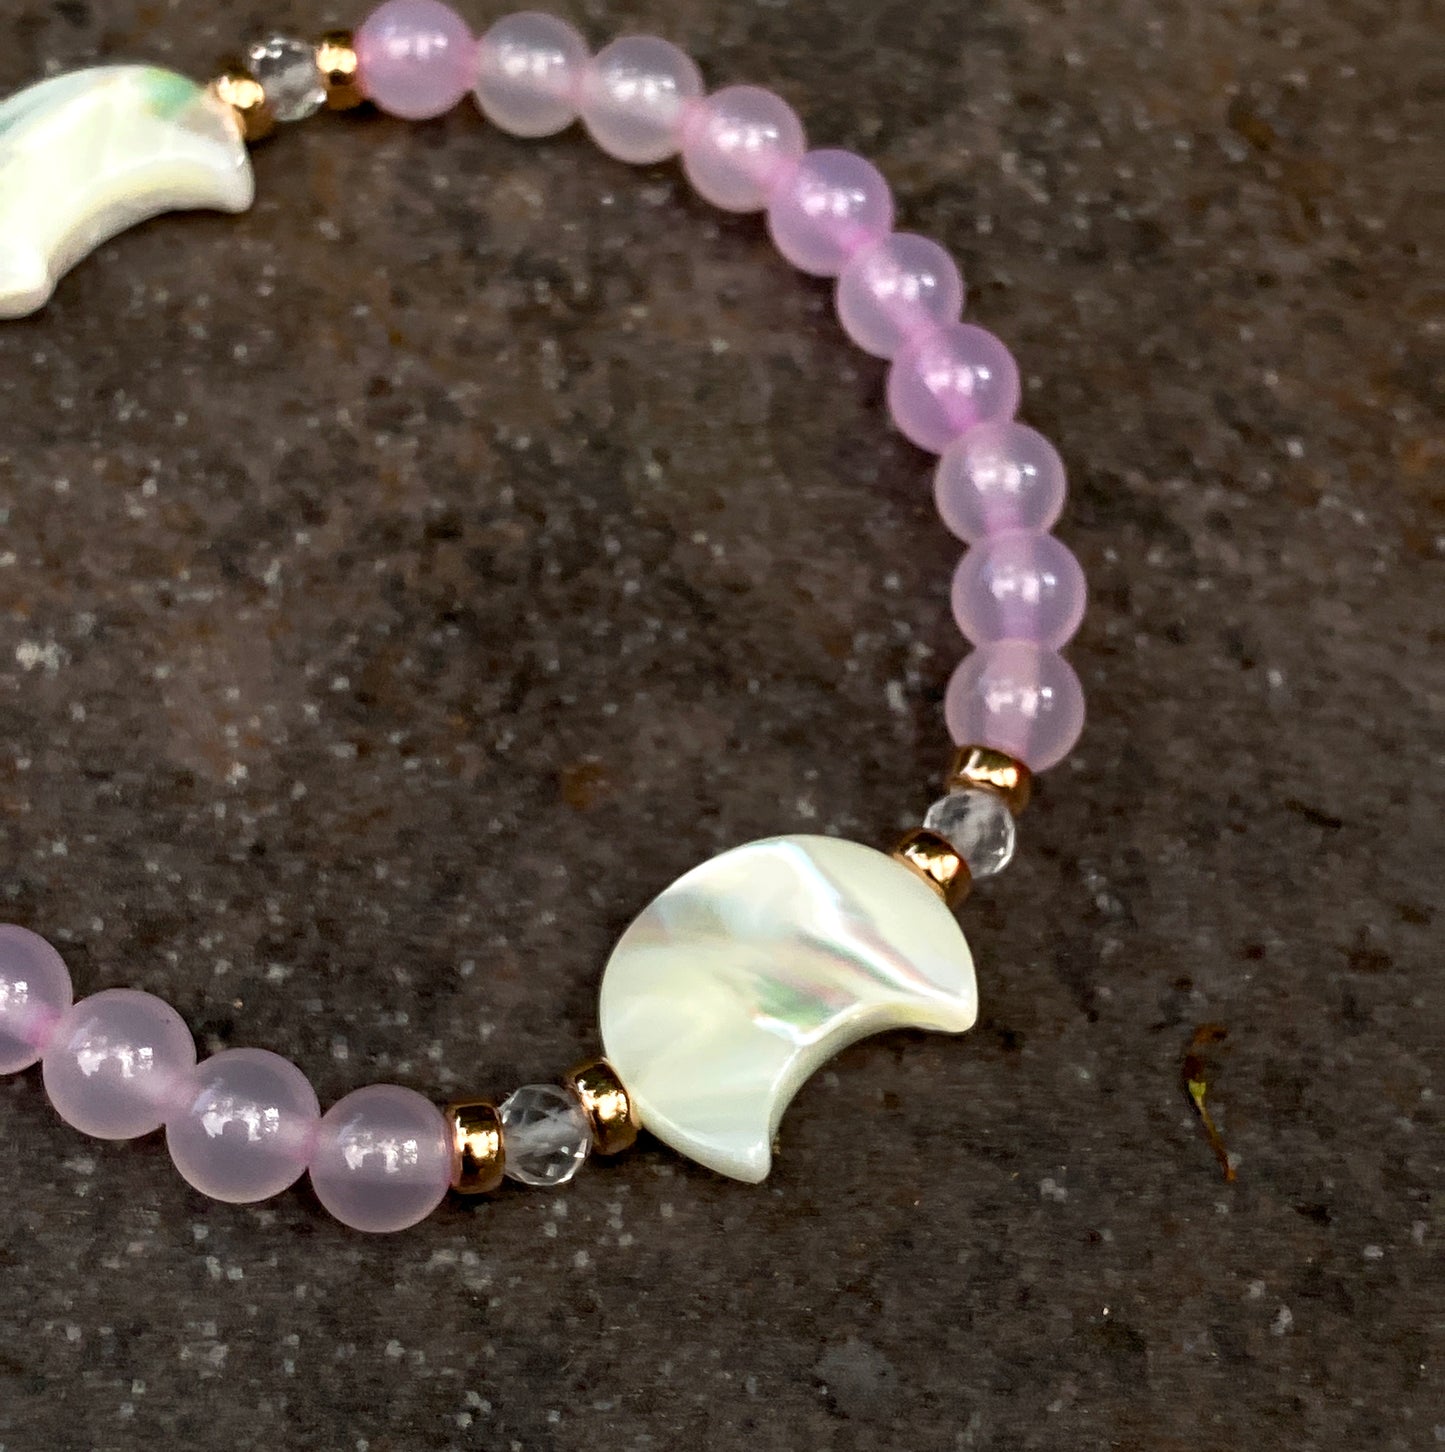 Double mother of pearl Moons, pink Agates, white Topaz Gemstone stretch bracelet